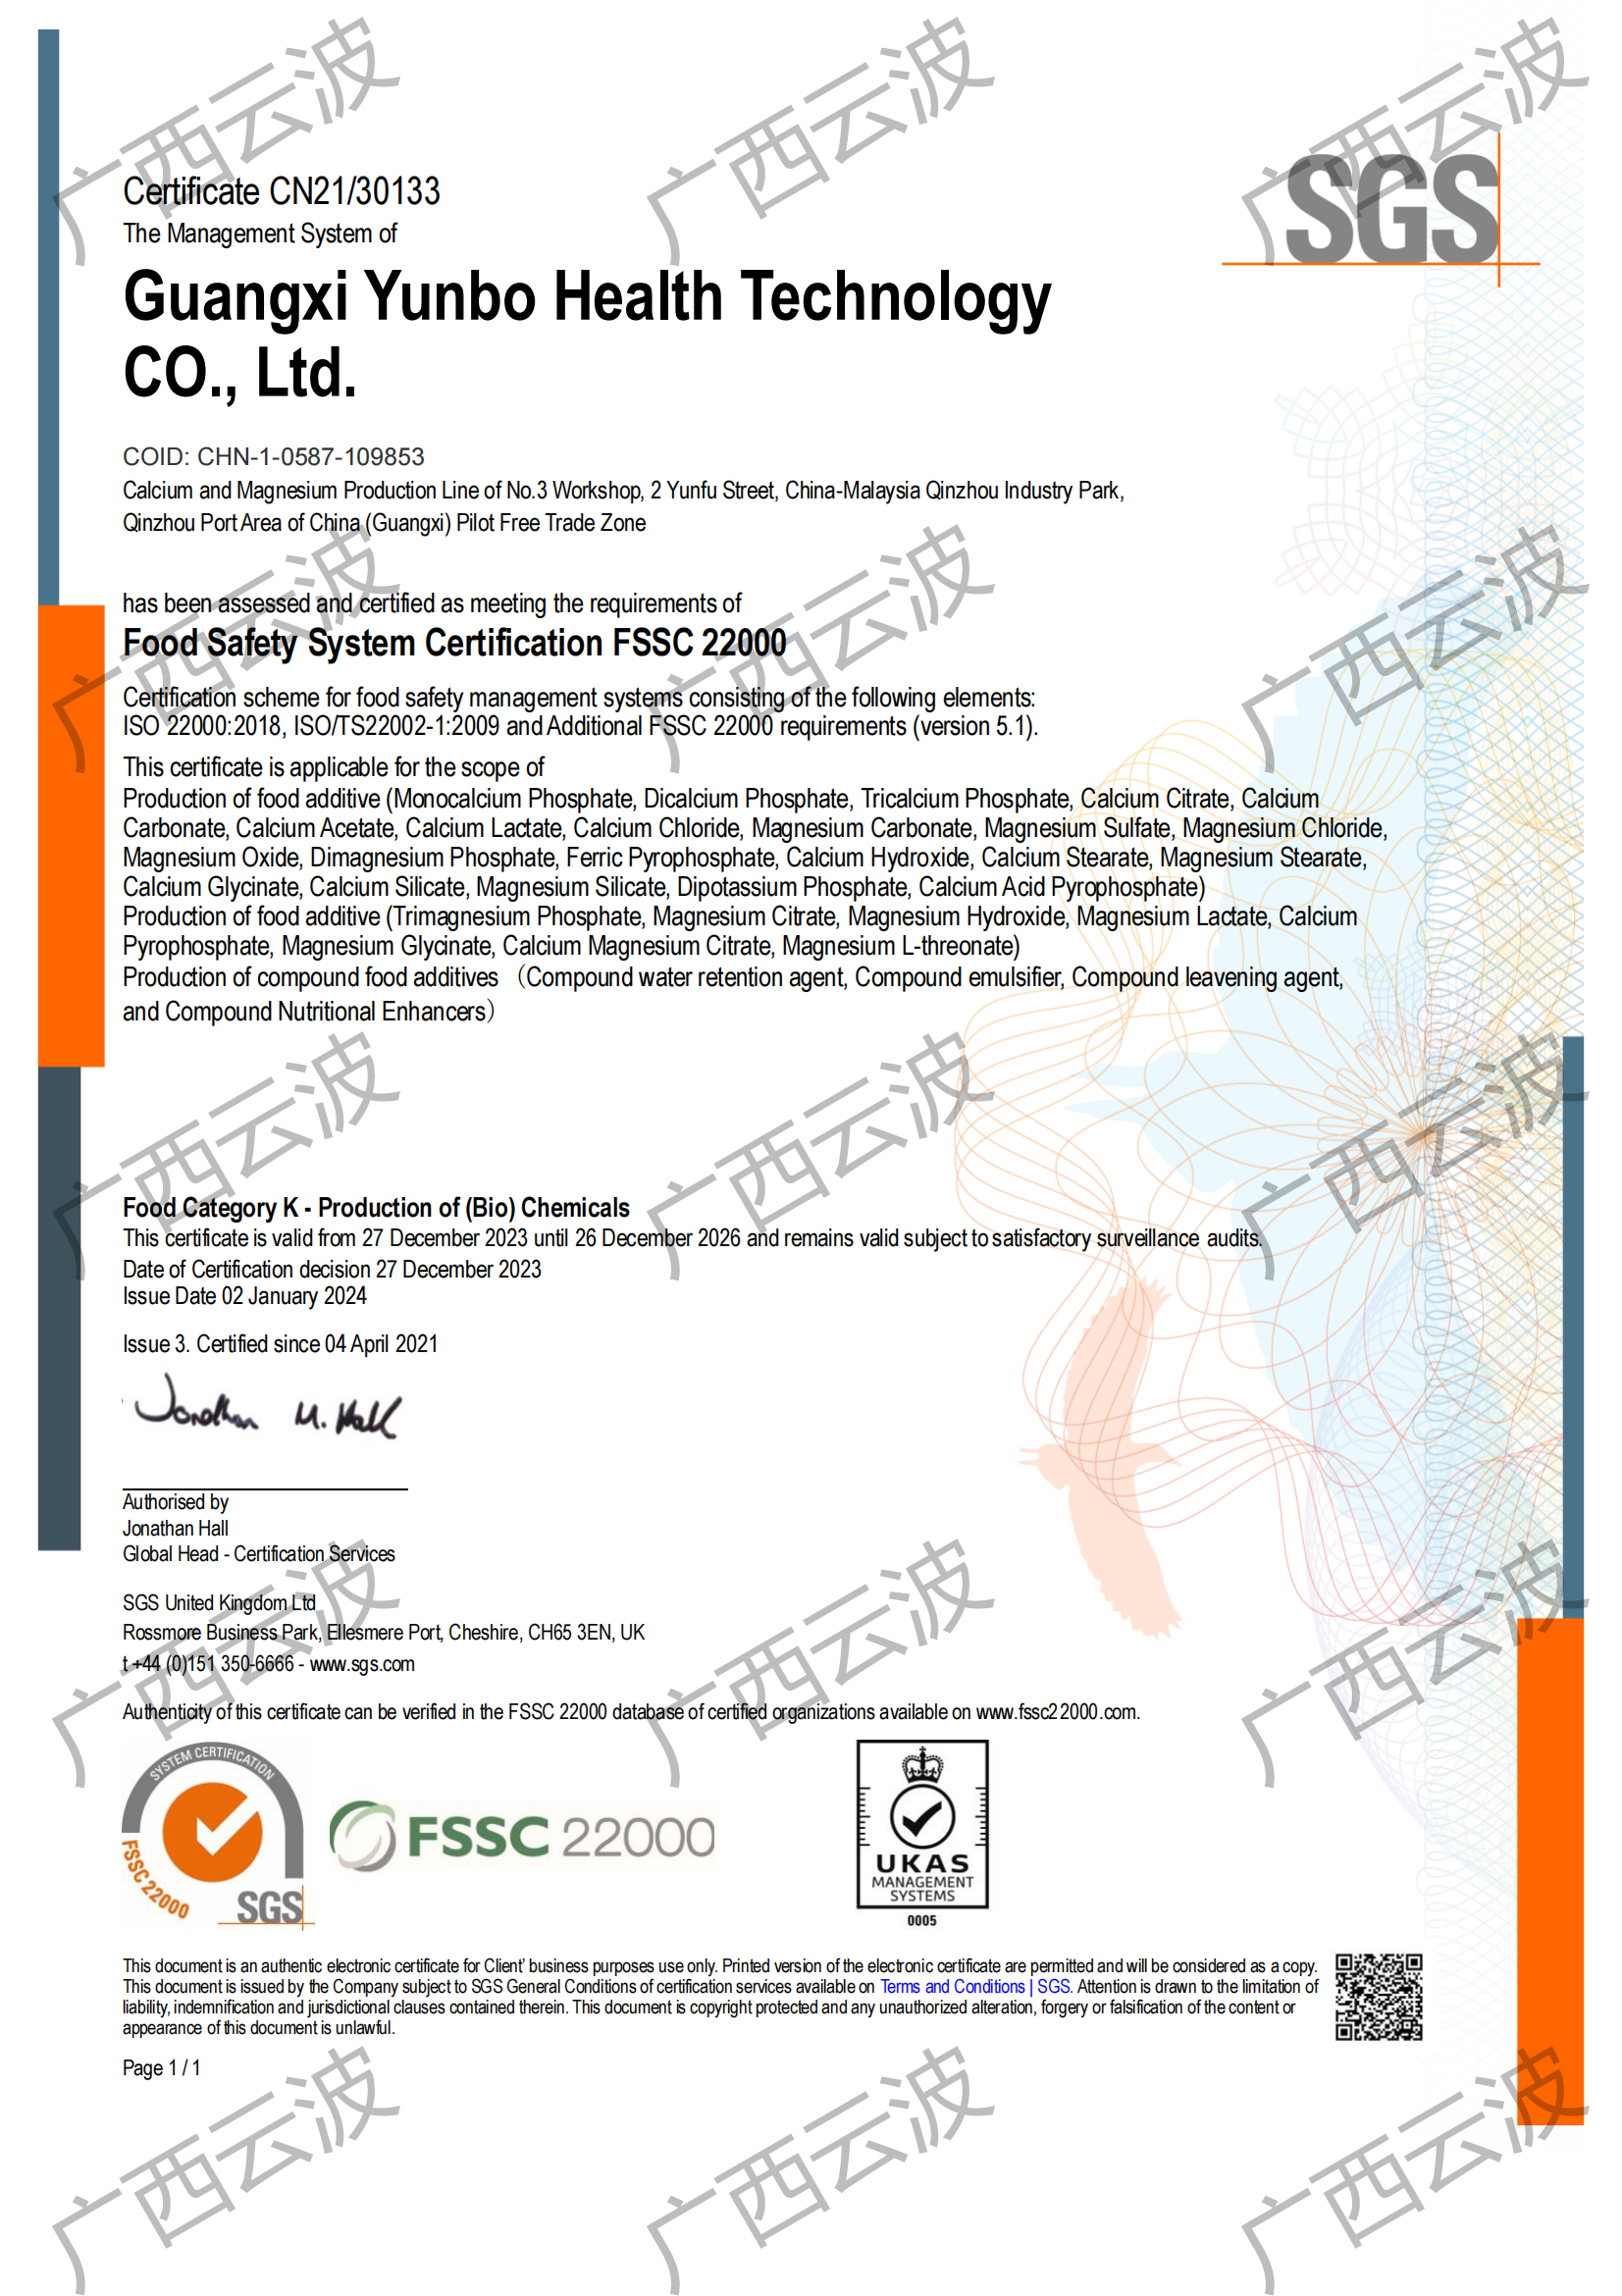 Food Safety System Certification